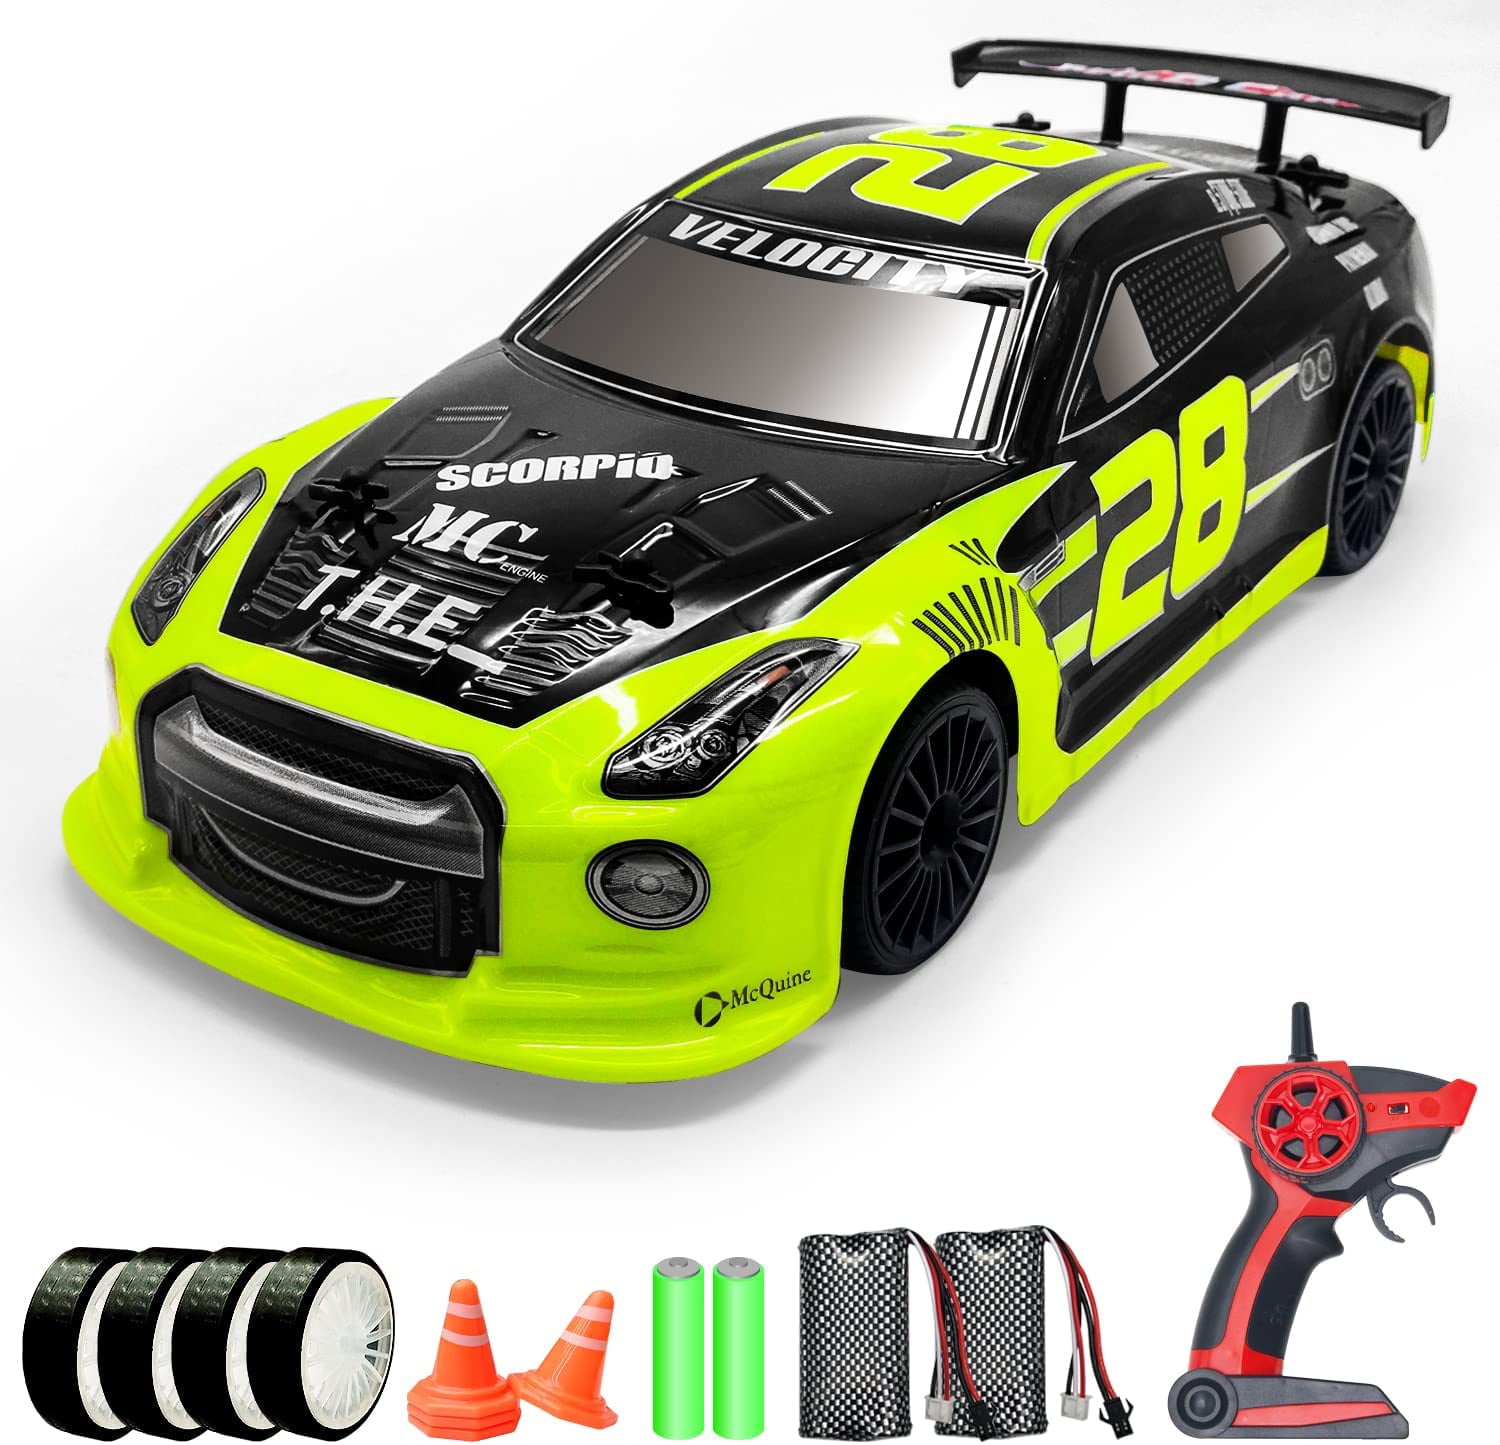  RACENT RC Car 1:14 4WD Remote Control Drift Car 15MPH High  Speed Vehicle Toy Trucks with Drifting & Racing Tires, 2 Rechargeable  Batteries, Gifts for Boys Kids Adults : Toys & Games